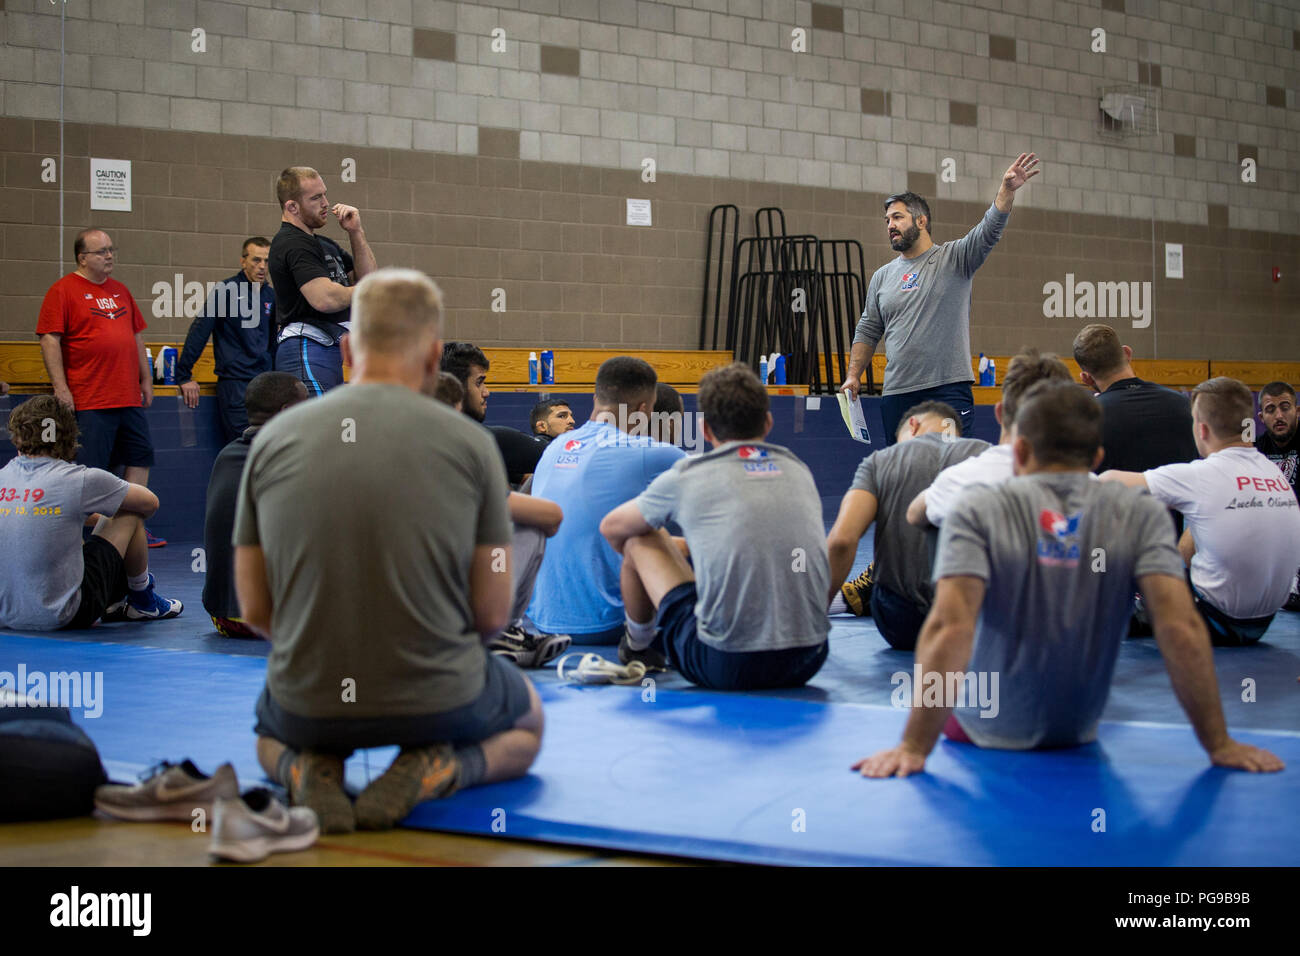 Bill Zadick, right, USA Wrestling’s National Freestyle coach, USA Wrestling Men’s Freestyle World Team Training Camp, speaks to the wrestlers prior to practice at the 43 Fitness Center at Marine Corps Base Camp Pendleton, California, Aug. 20, 2018.  During his first year of coaching, Zadick successfully led his team to the World Team Title at the World Championships in 2017. (U.S. Marine Corps photo by Lance Cpl. Betzabeth Y. Galvan) Stock Photo